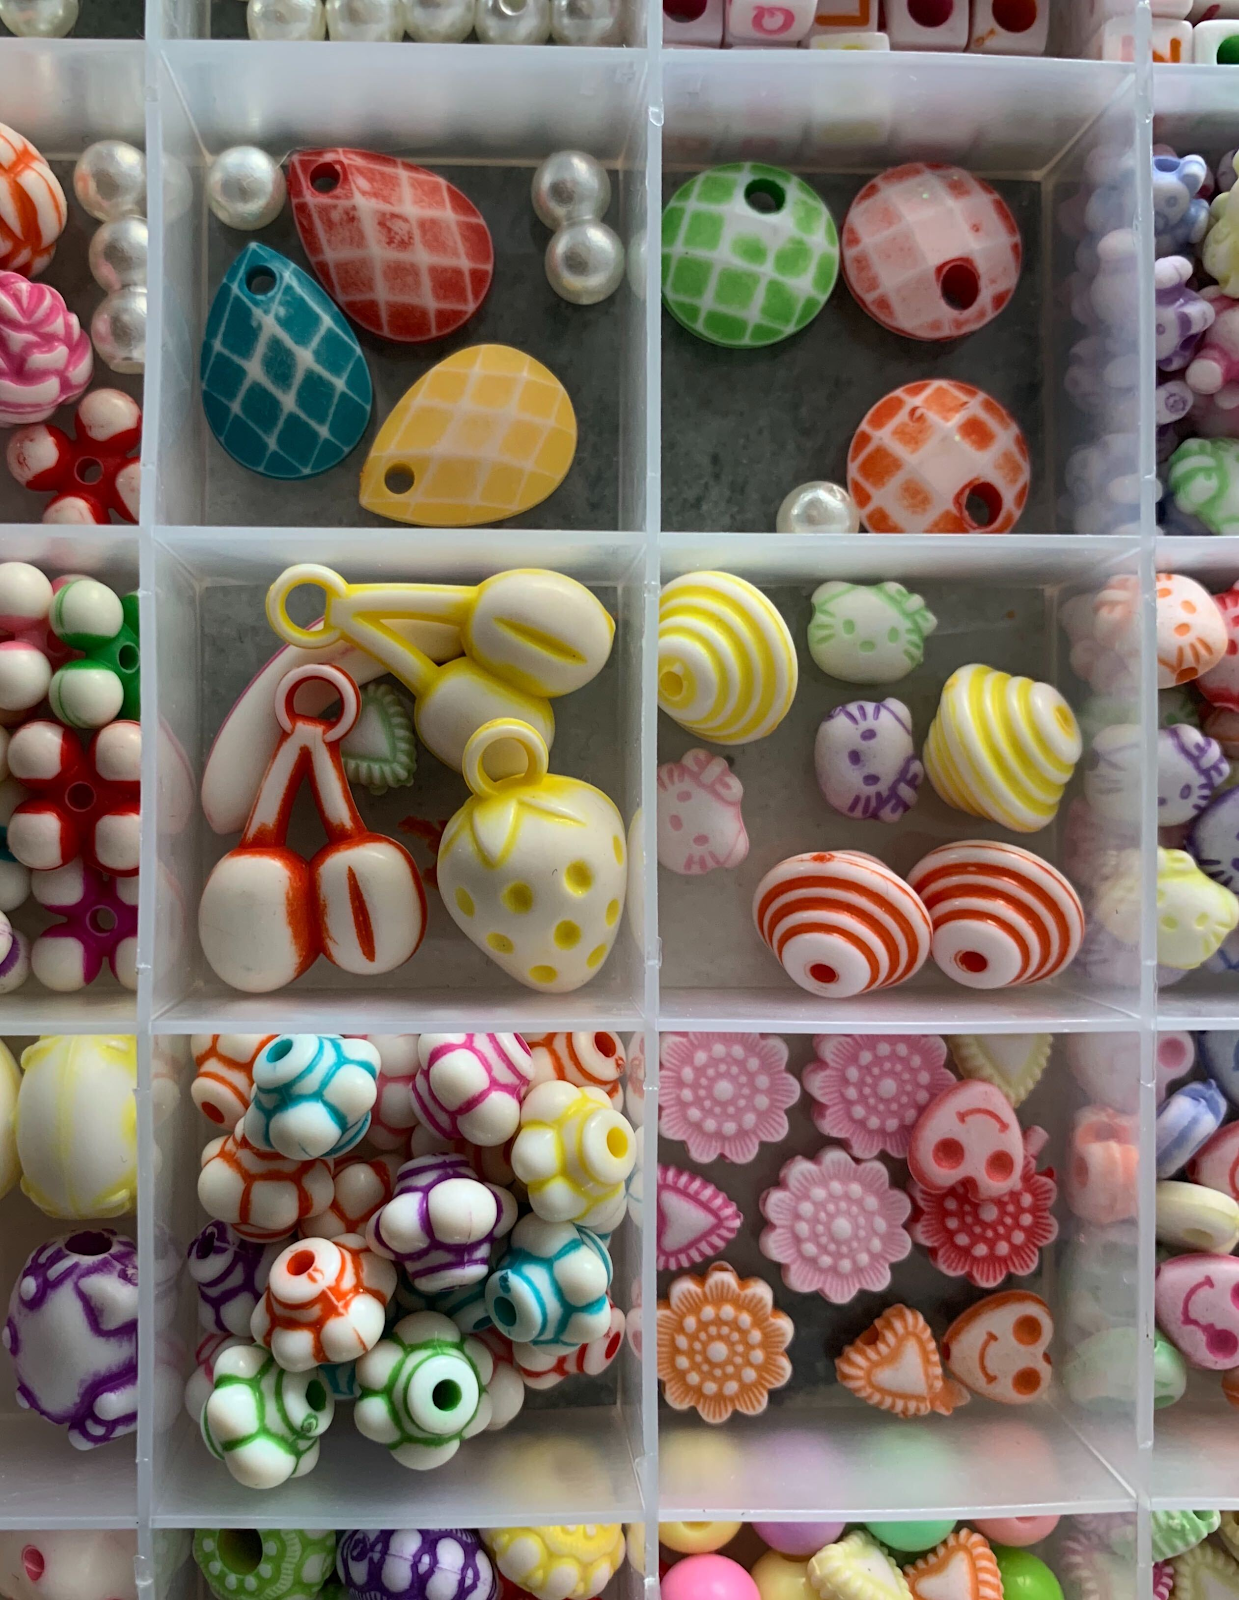 A plastic case divided into squares each holding a variety of colored beads.